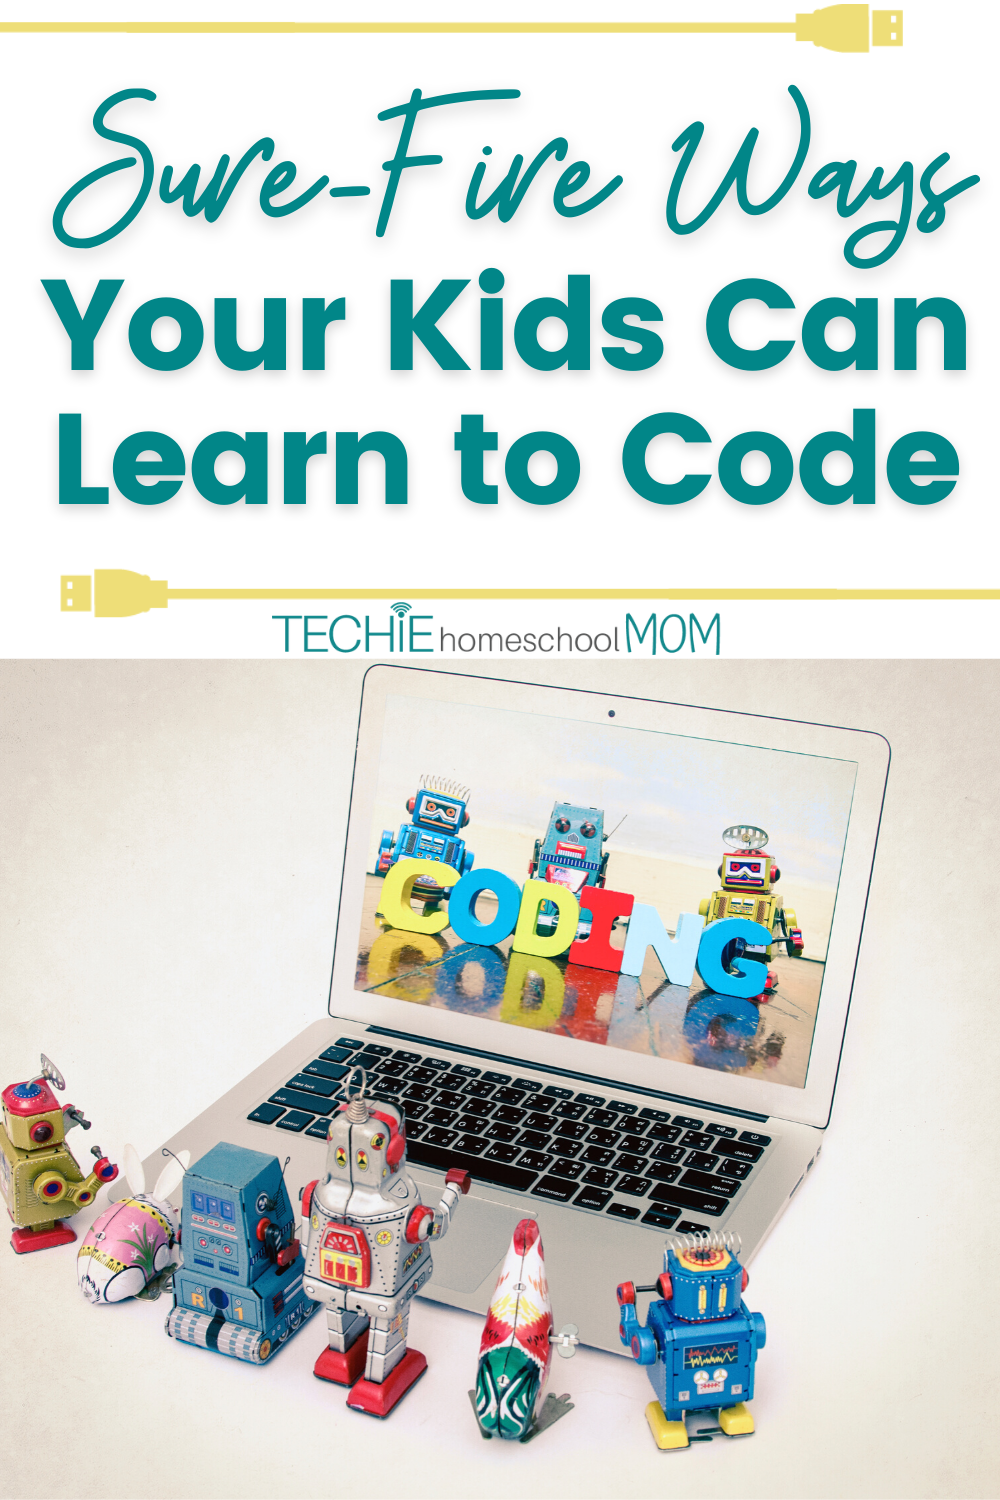 What a great article about different ways kids can learn to code. Coding is foreign to lots of us digital immigrants, but it seems kids want to learn programming and coding. Lots of good ideas here!